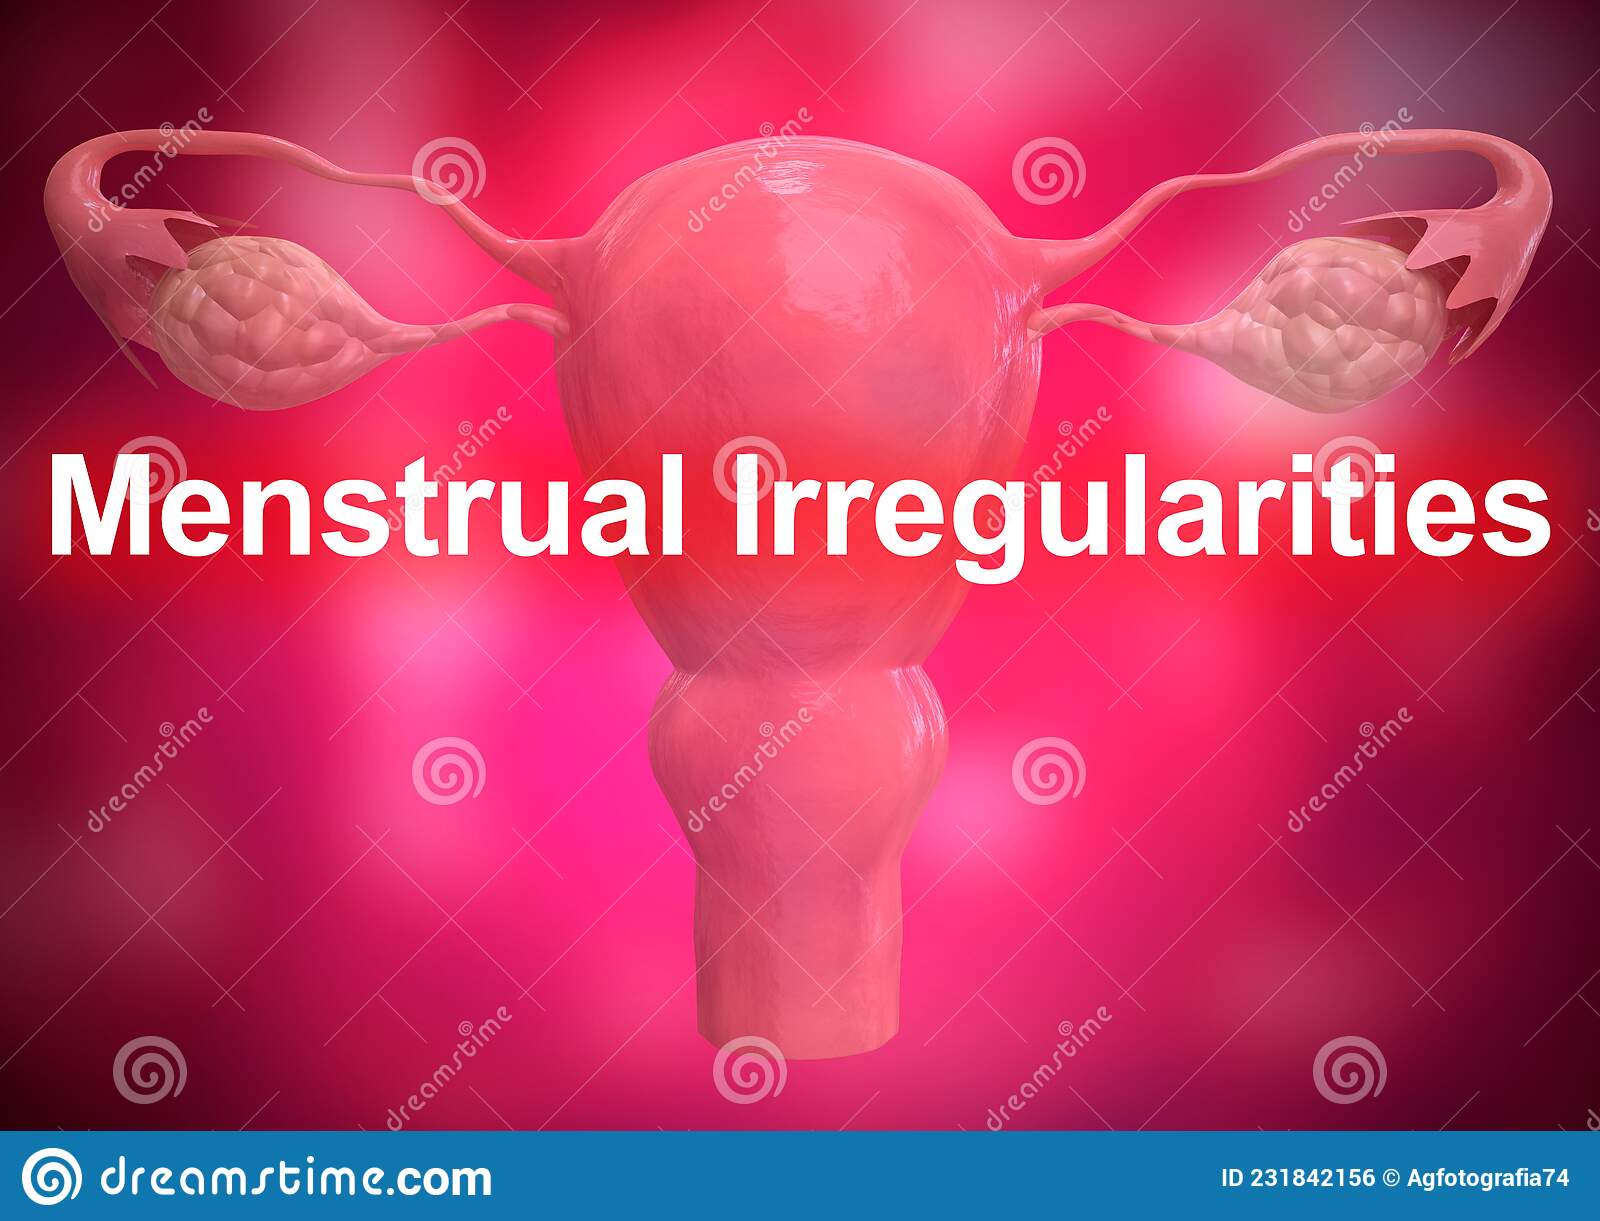 letter-menstrual-irregularities-medical-concept-changing-cycle-d-rendering-231842156-2989863041.jpg